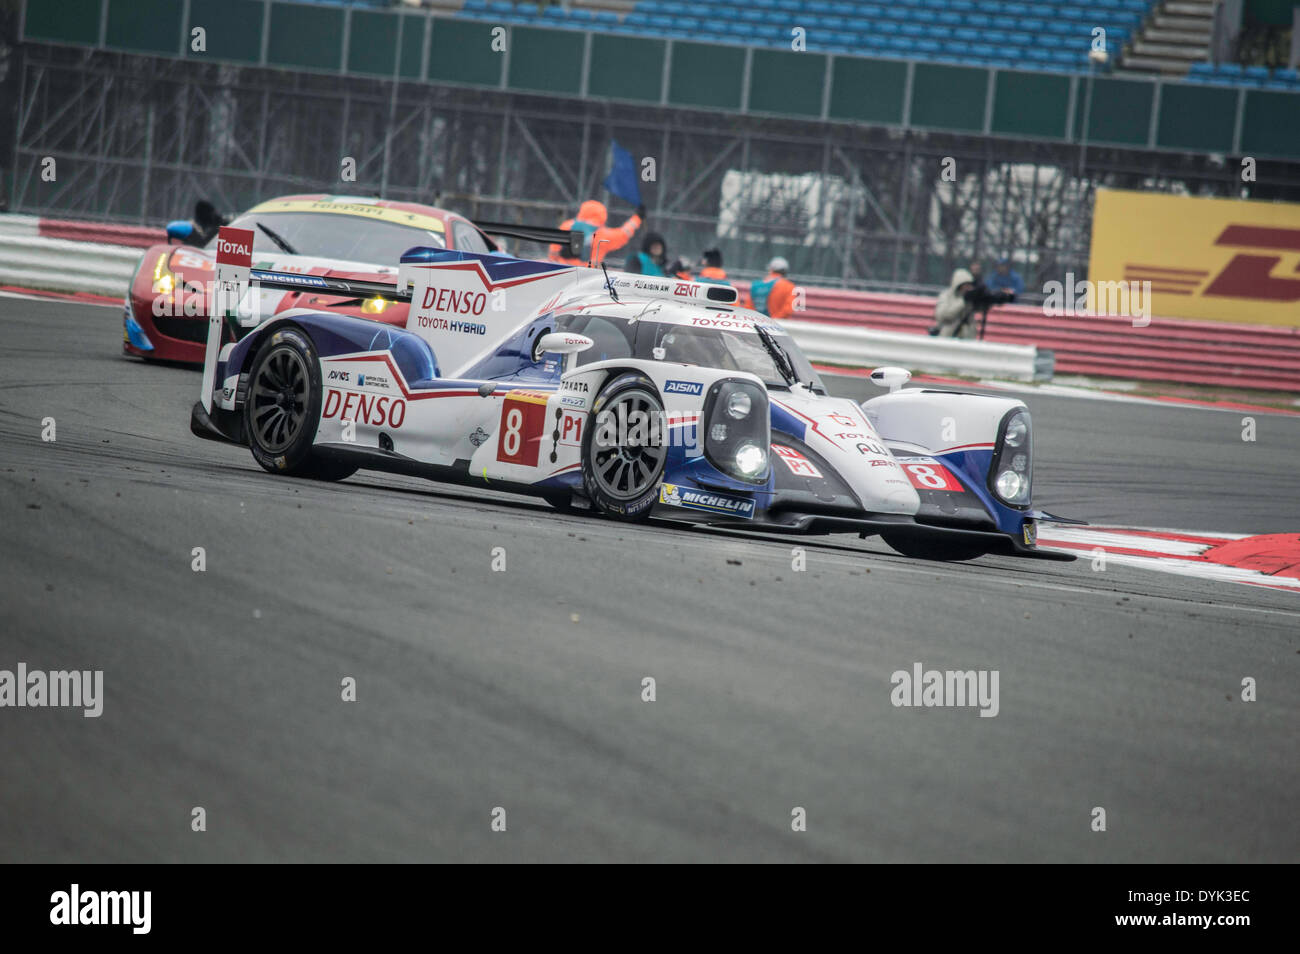 Towcester, UK. 20th Apr, 2014. The #8 Toyota TS 040 - Hybrid driven by ANTHONY DAVIDSON, NICOLAS LAPIERRE and SÉBASTIEN BUEMI during the 6 hours of Silverstone 2014 at Silverstone Circuit in Towcester, United Kingdom. Credit:  Gergo Toth/Alamy Live News Stock Photo